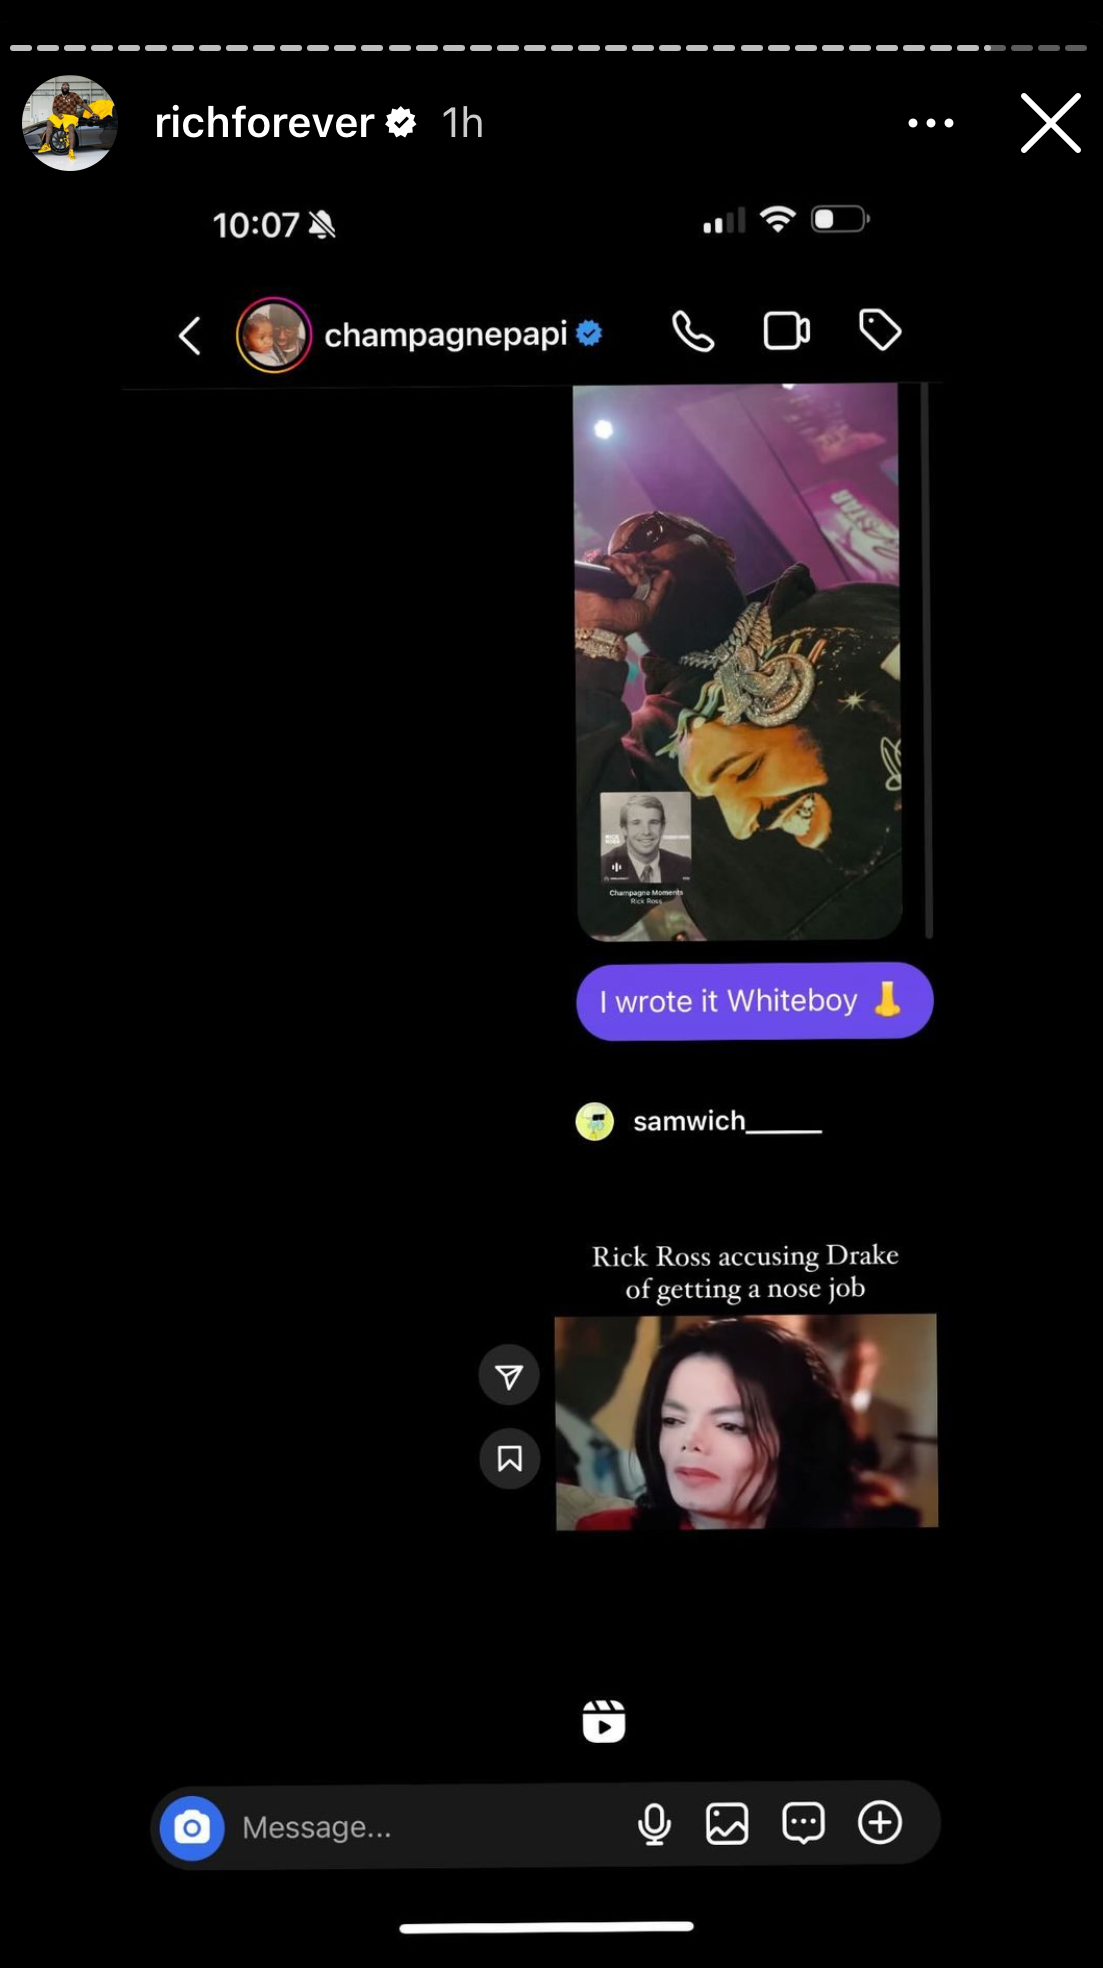 Screenshot of a social media interaction between richforever and champagnepapi with emojis, a text message, and photos